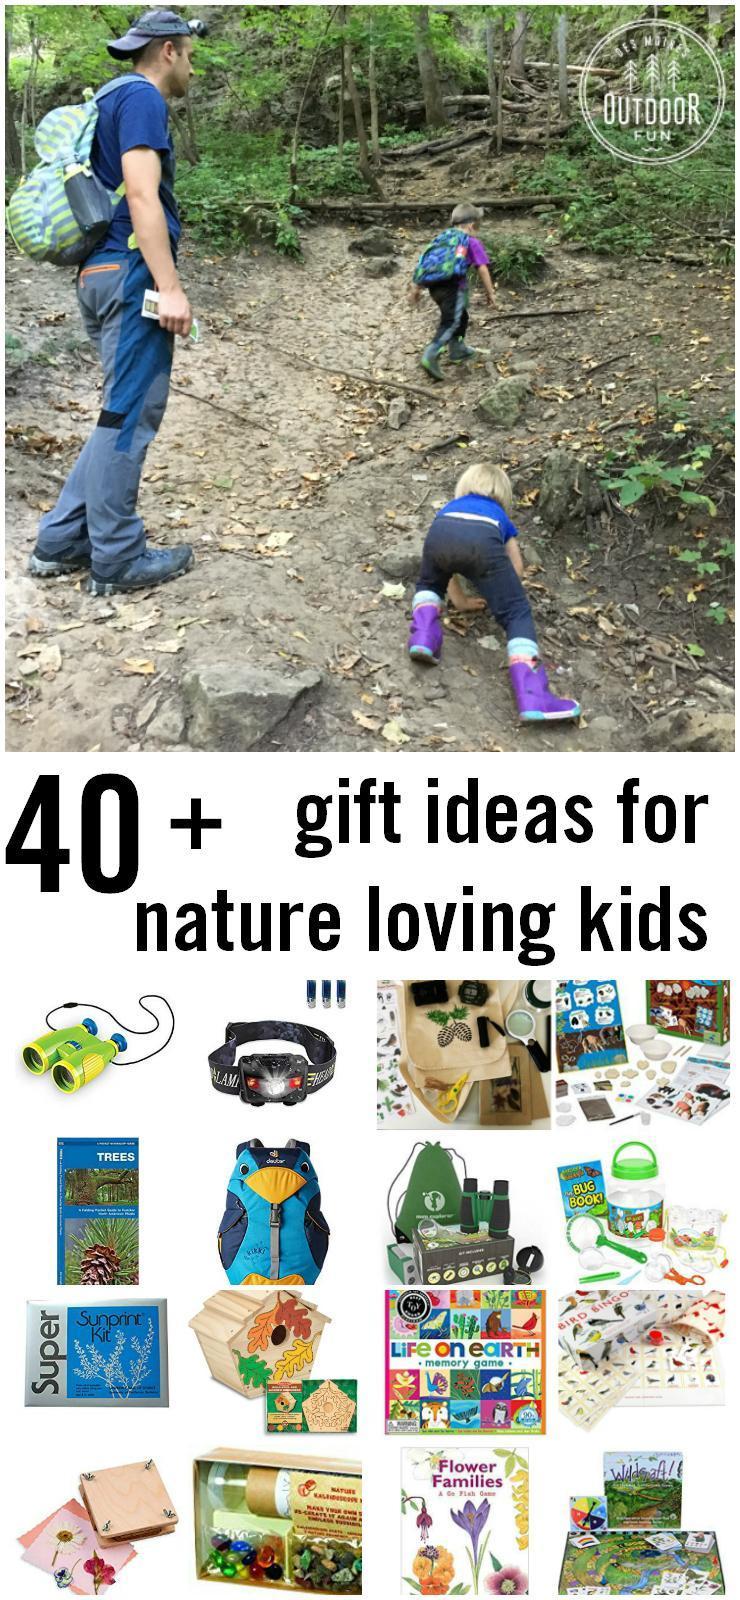 Check out this huge list of gift ideas for nature loving kids! Games, experiences, gear, crafts - something for every outdoorsy kid. #parenting #giftguide